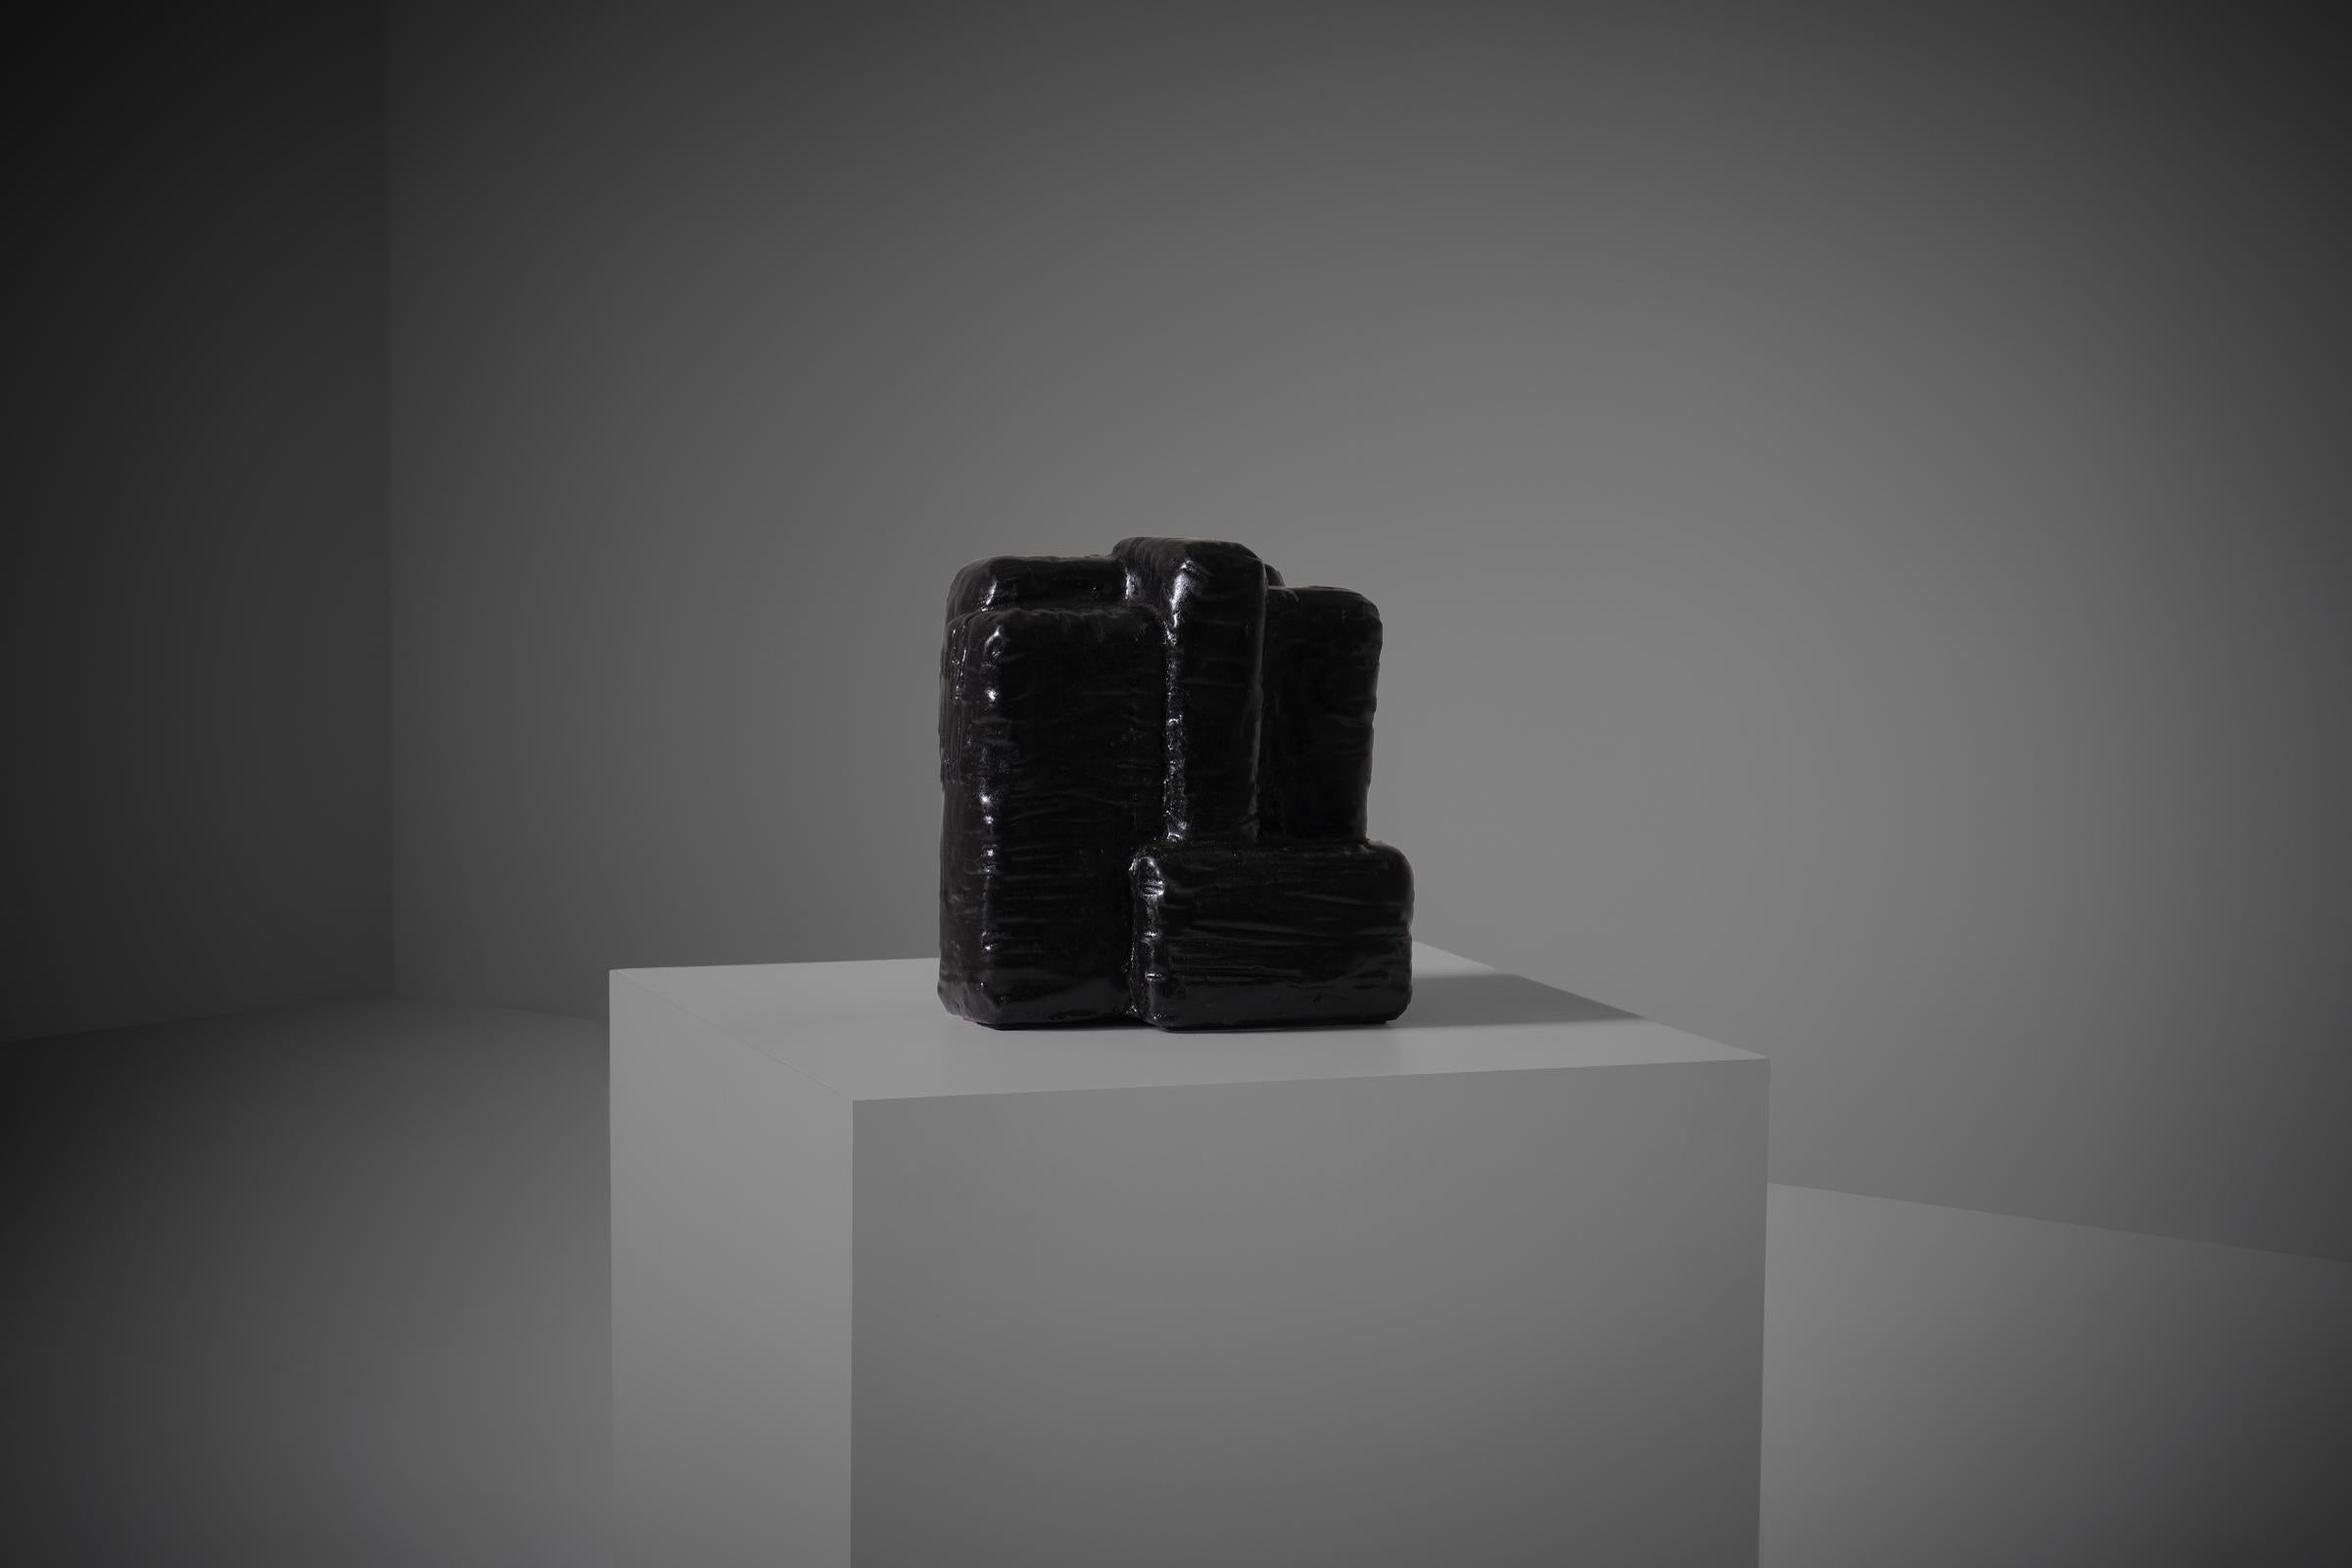 Abstract cubistic ceramic sculpture, The Netherlands 1970s. The sculpture is made out of heavy chamotte clay with a beautiful black glazed finish. Interesting composition out of several interlocking communicating cubic shapes with an outspoken and